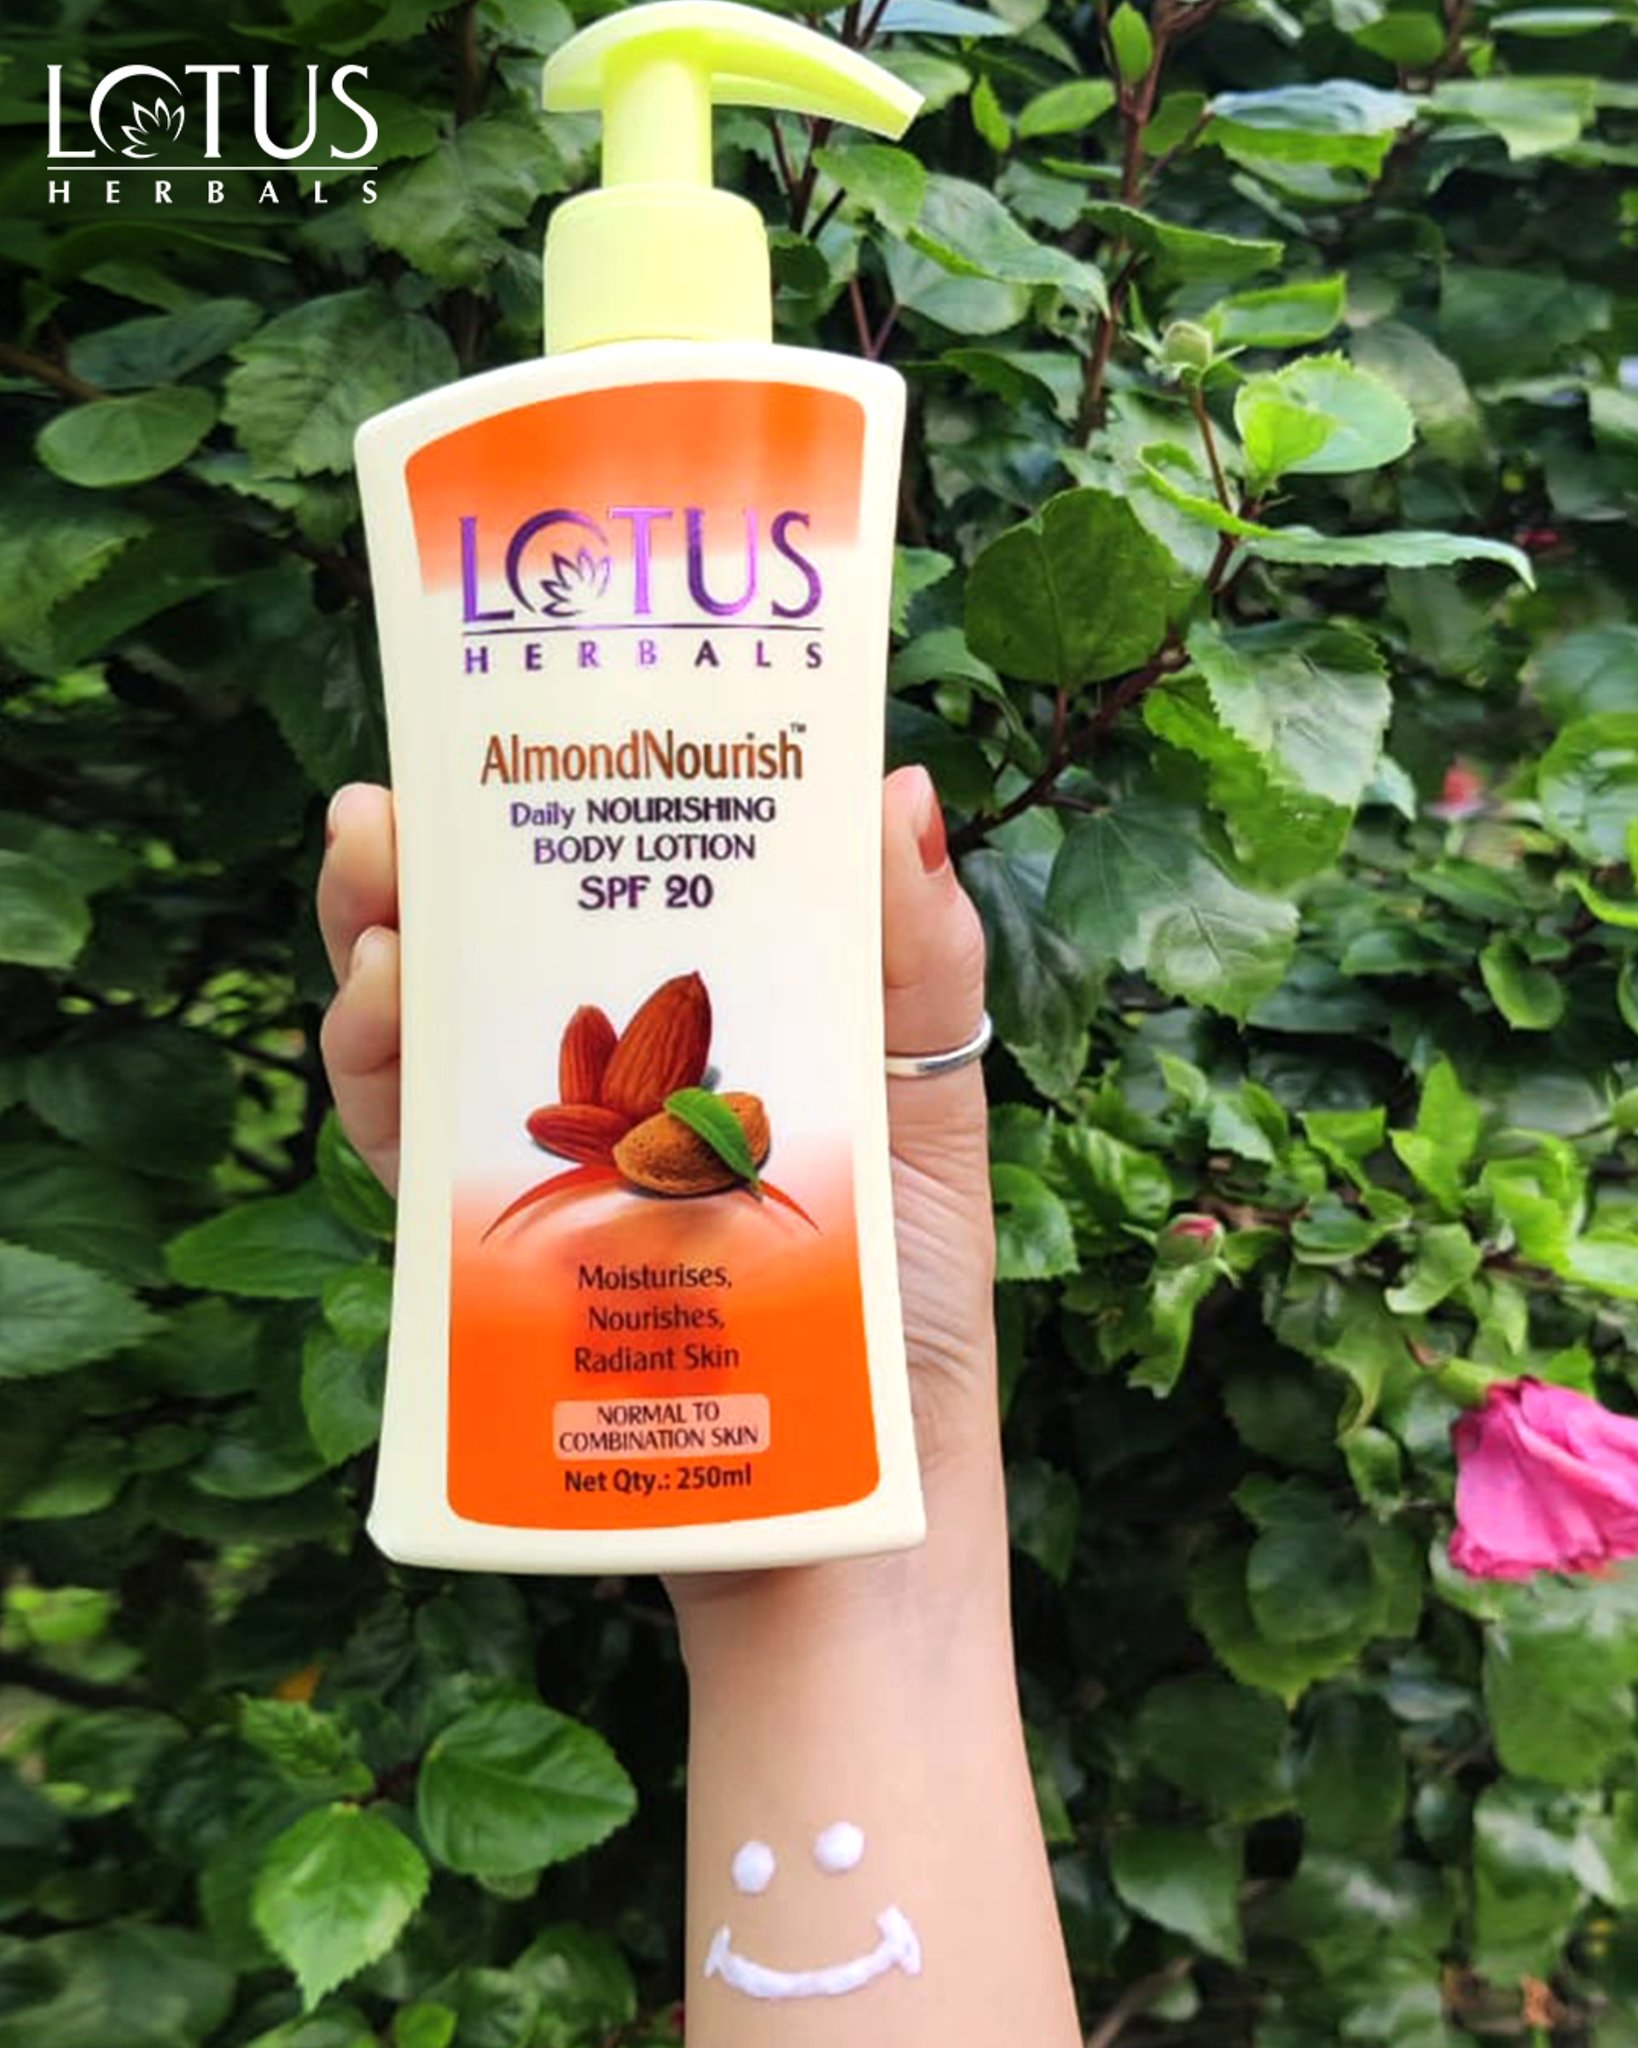 Geit mannetje Brein Lotus Herbals on Twitter: "Lotus Herbals Almond Nourish body lotion has the  right blend of real almond oil to smoothen and soften your skin just  instantly. What more? The SPF 20 shields